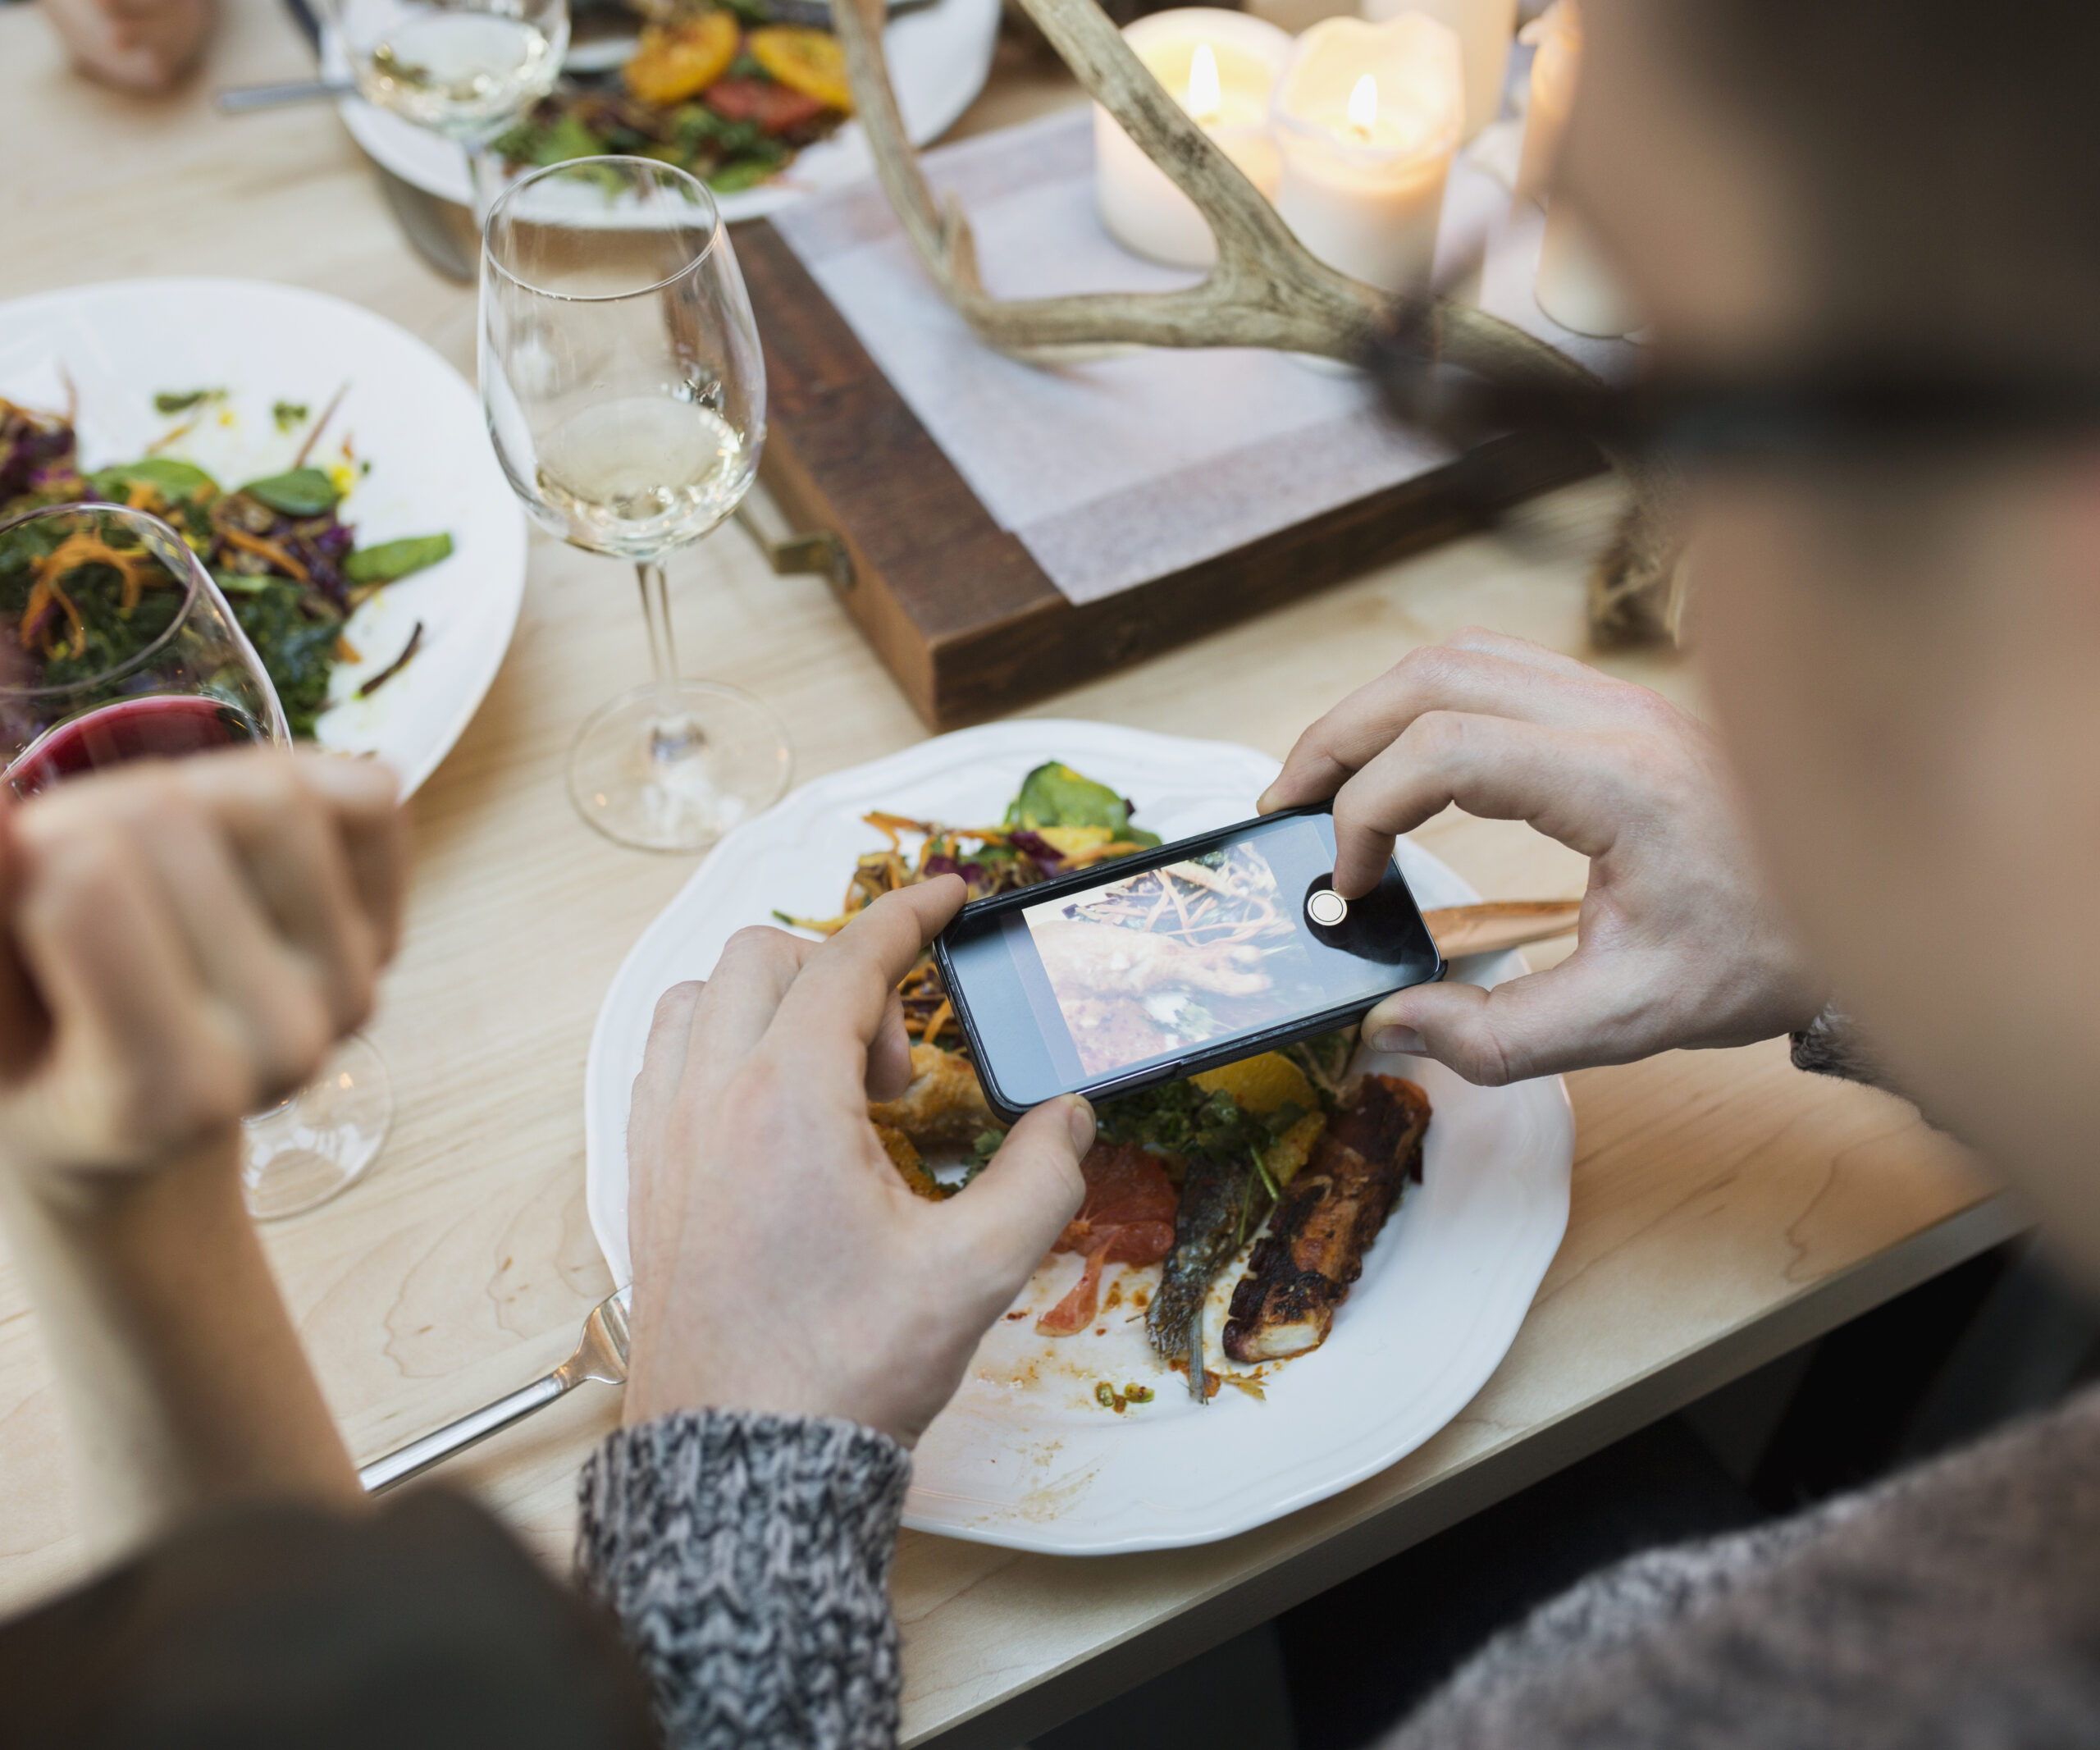 Why you should never take photos of food in restaurants 